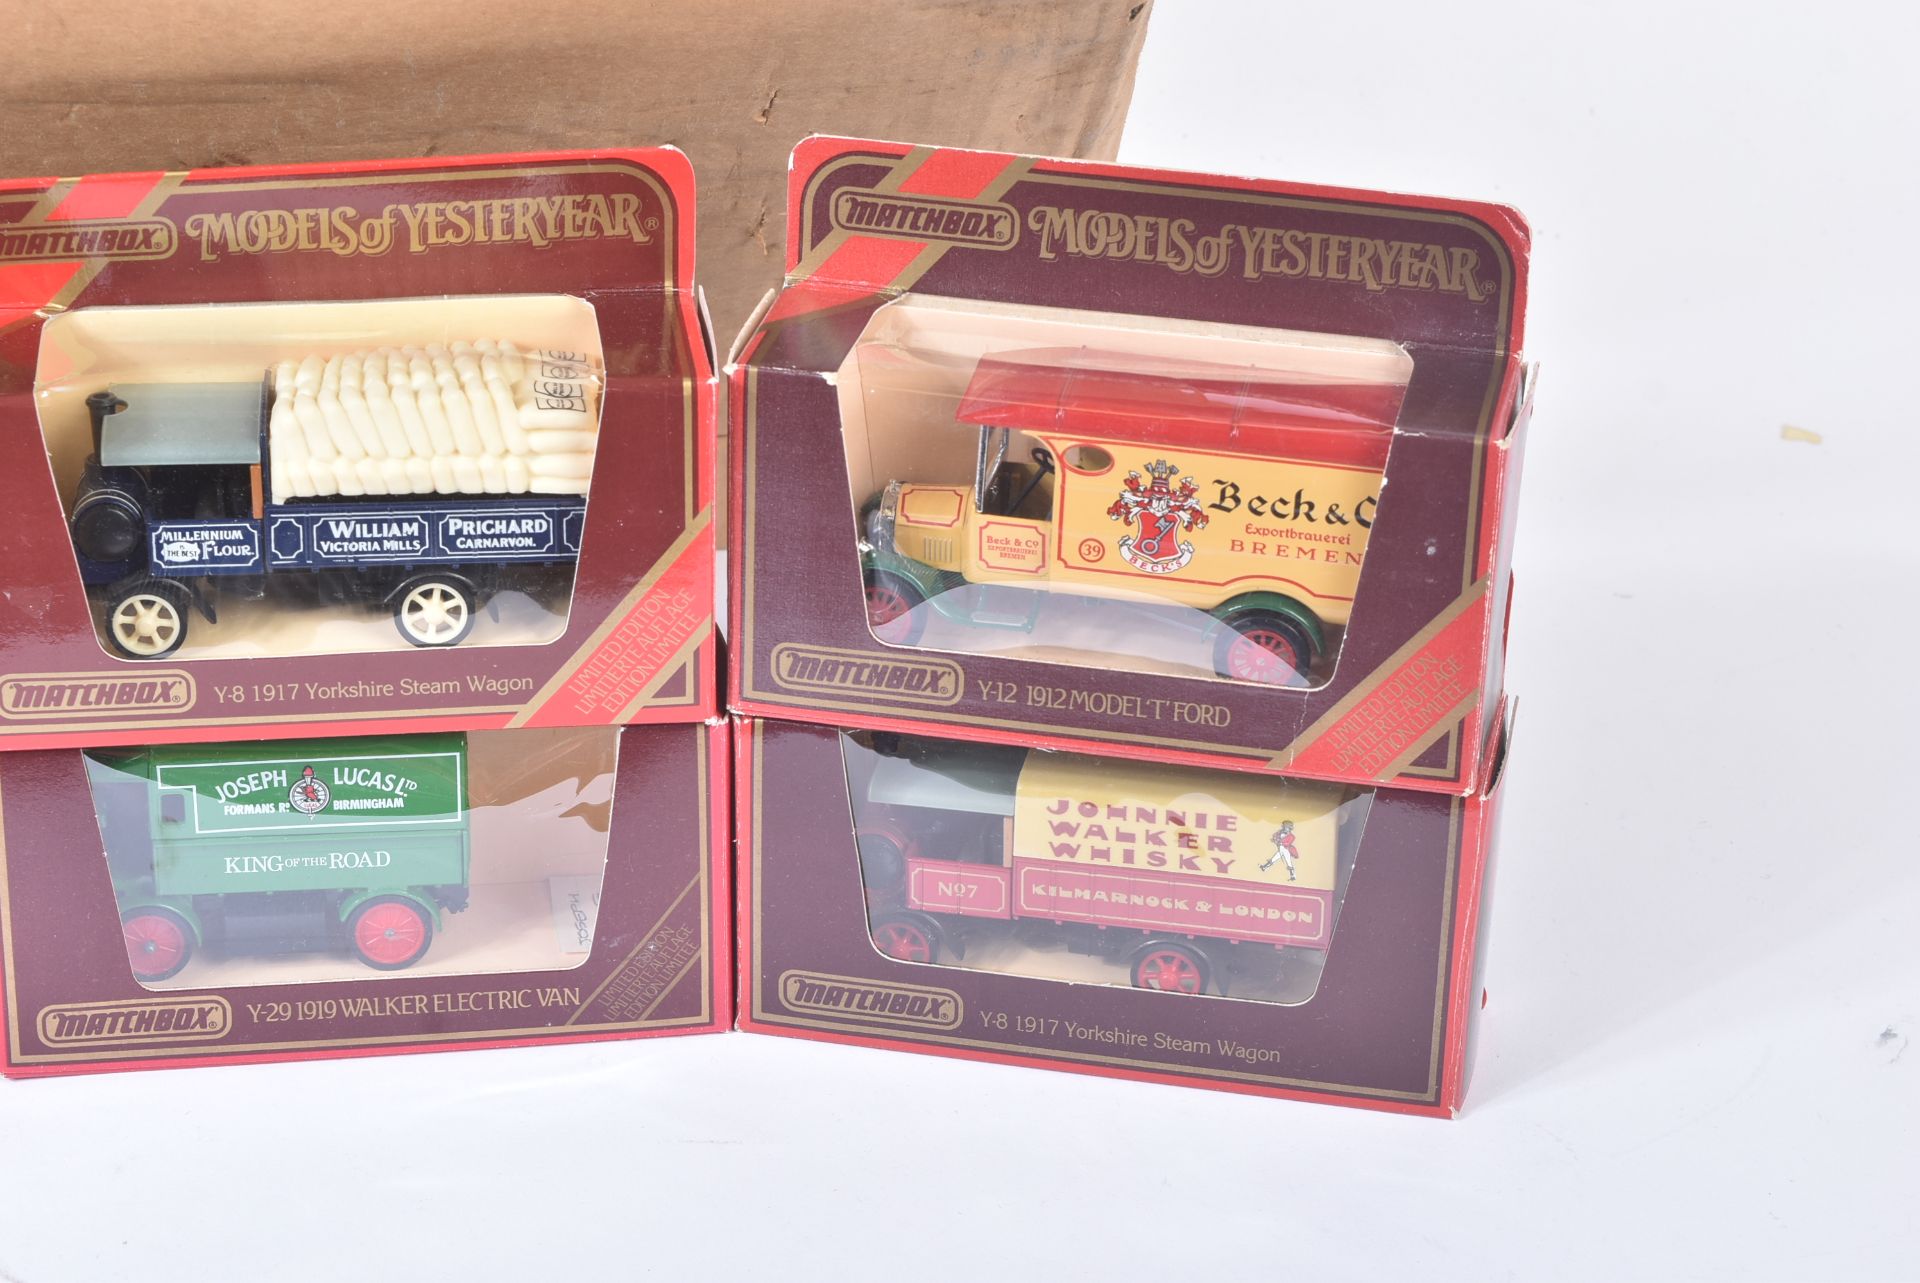 LARGE COLLECTION OF MATCHBOX MODELS OF YESTERYEAR DIECAST - Image 4 of 8